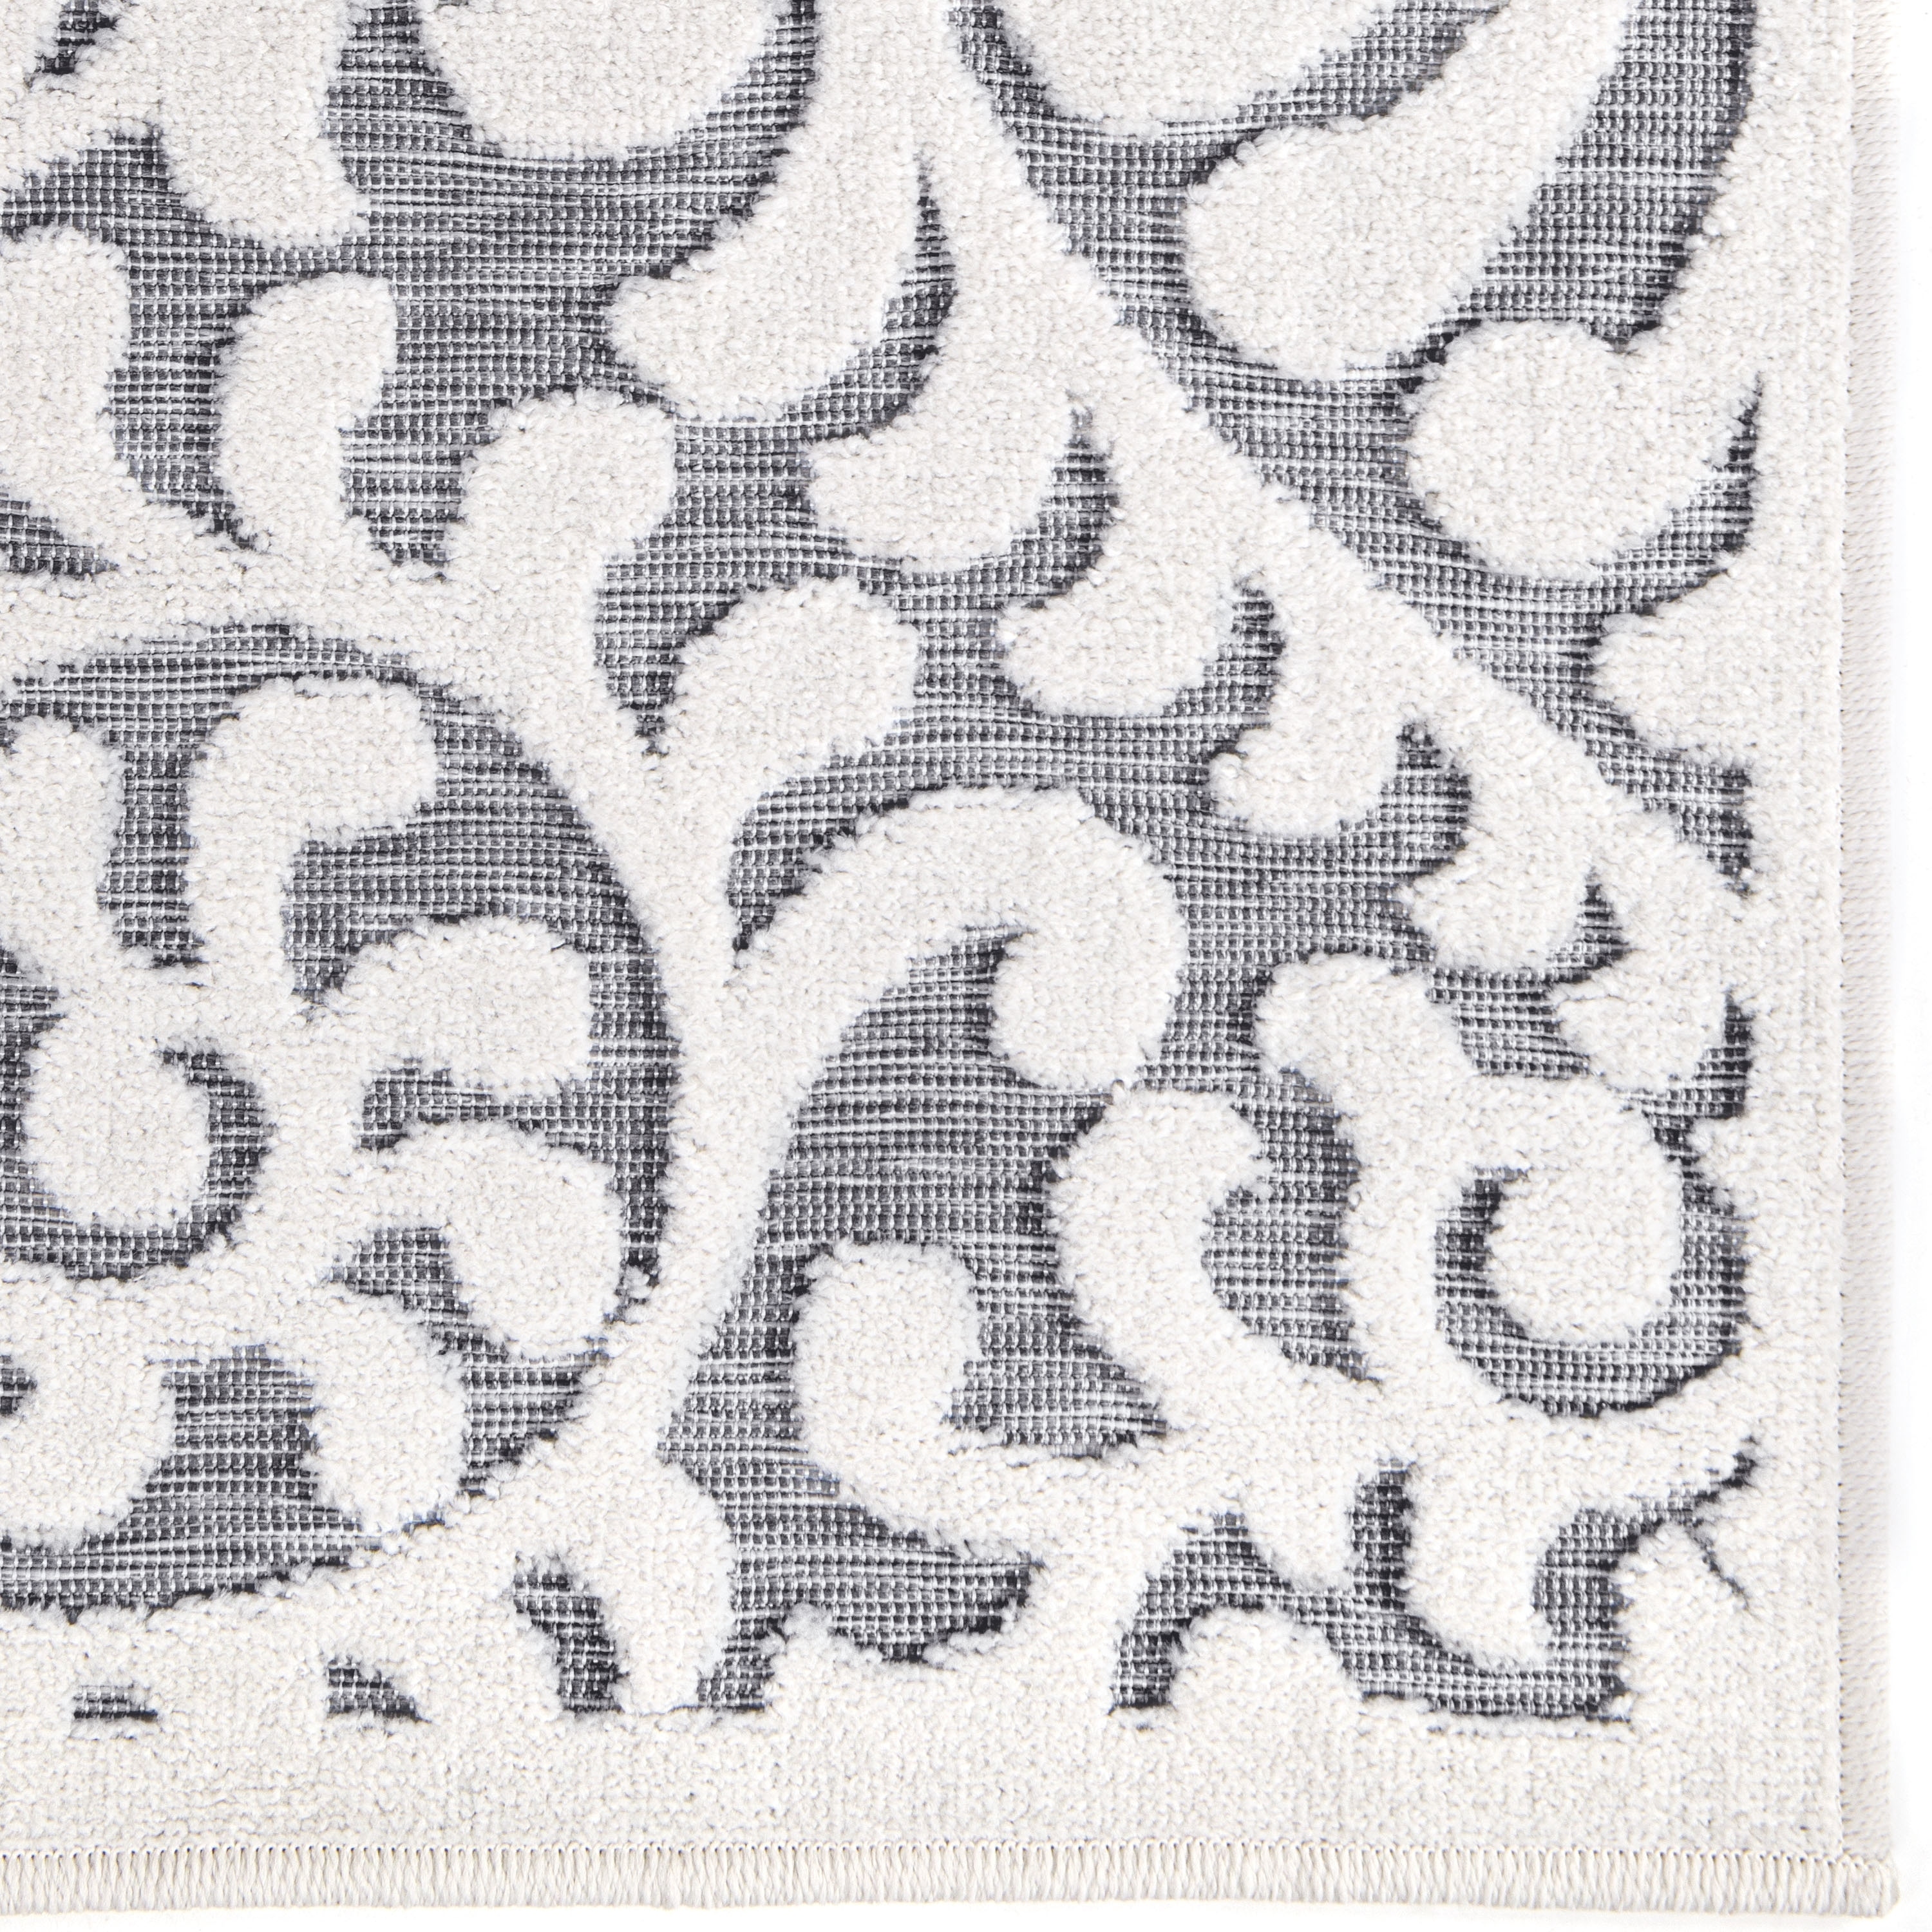 My Texas House Scrollwork High-low Area Rug by Orian Bluebonnets